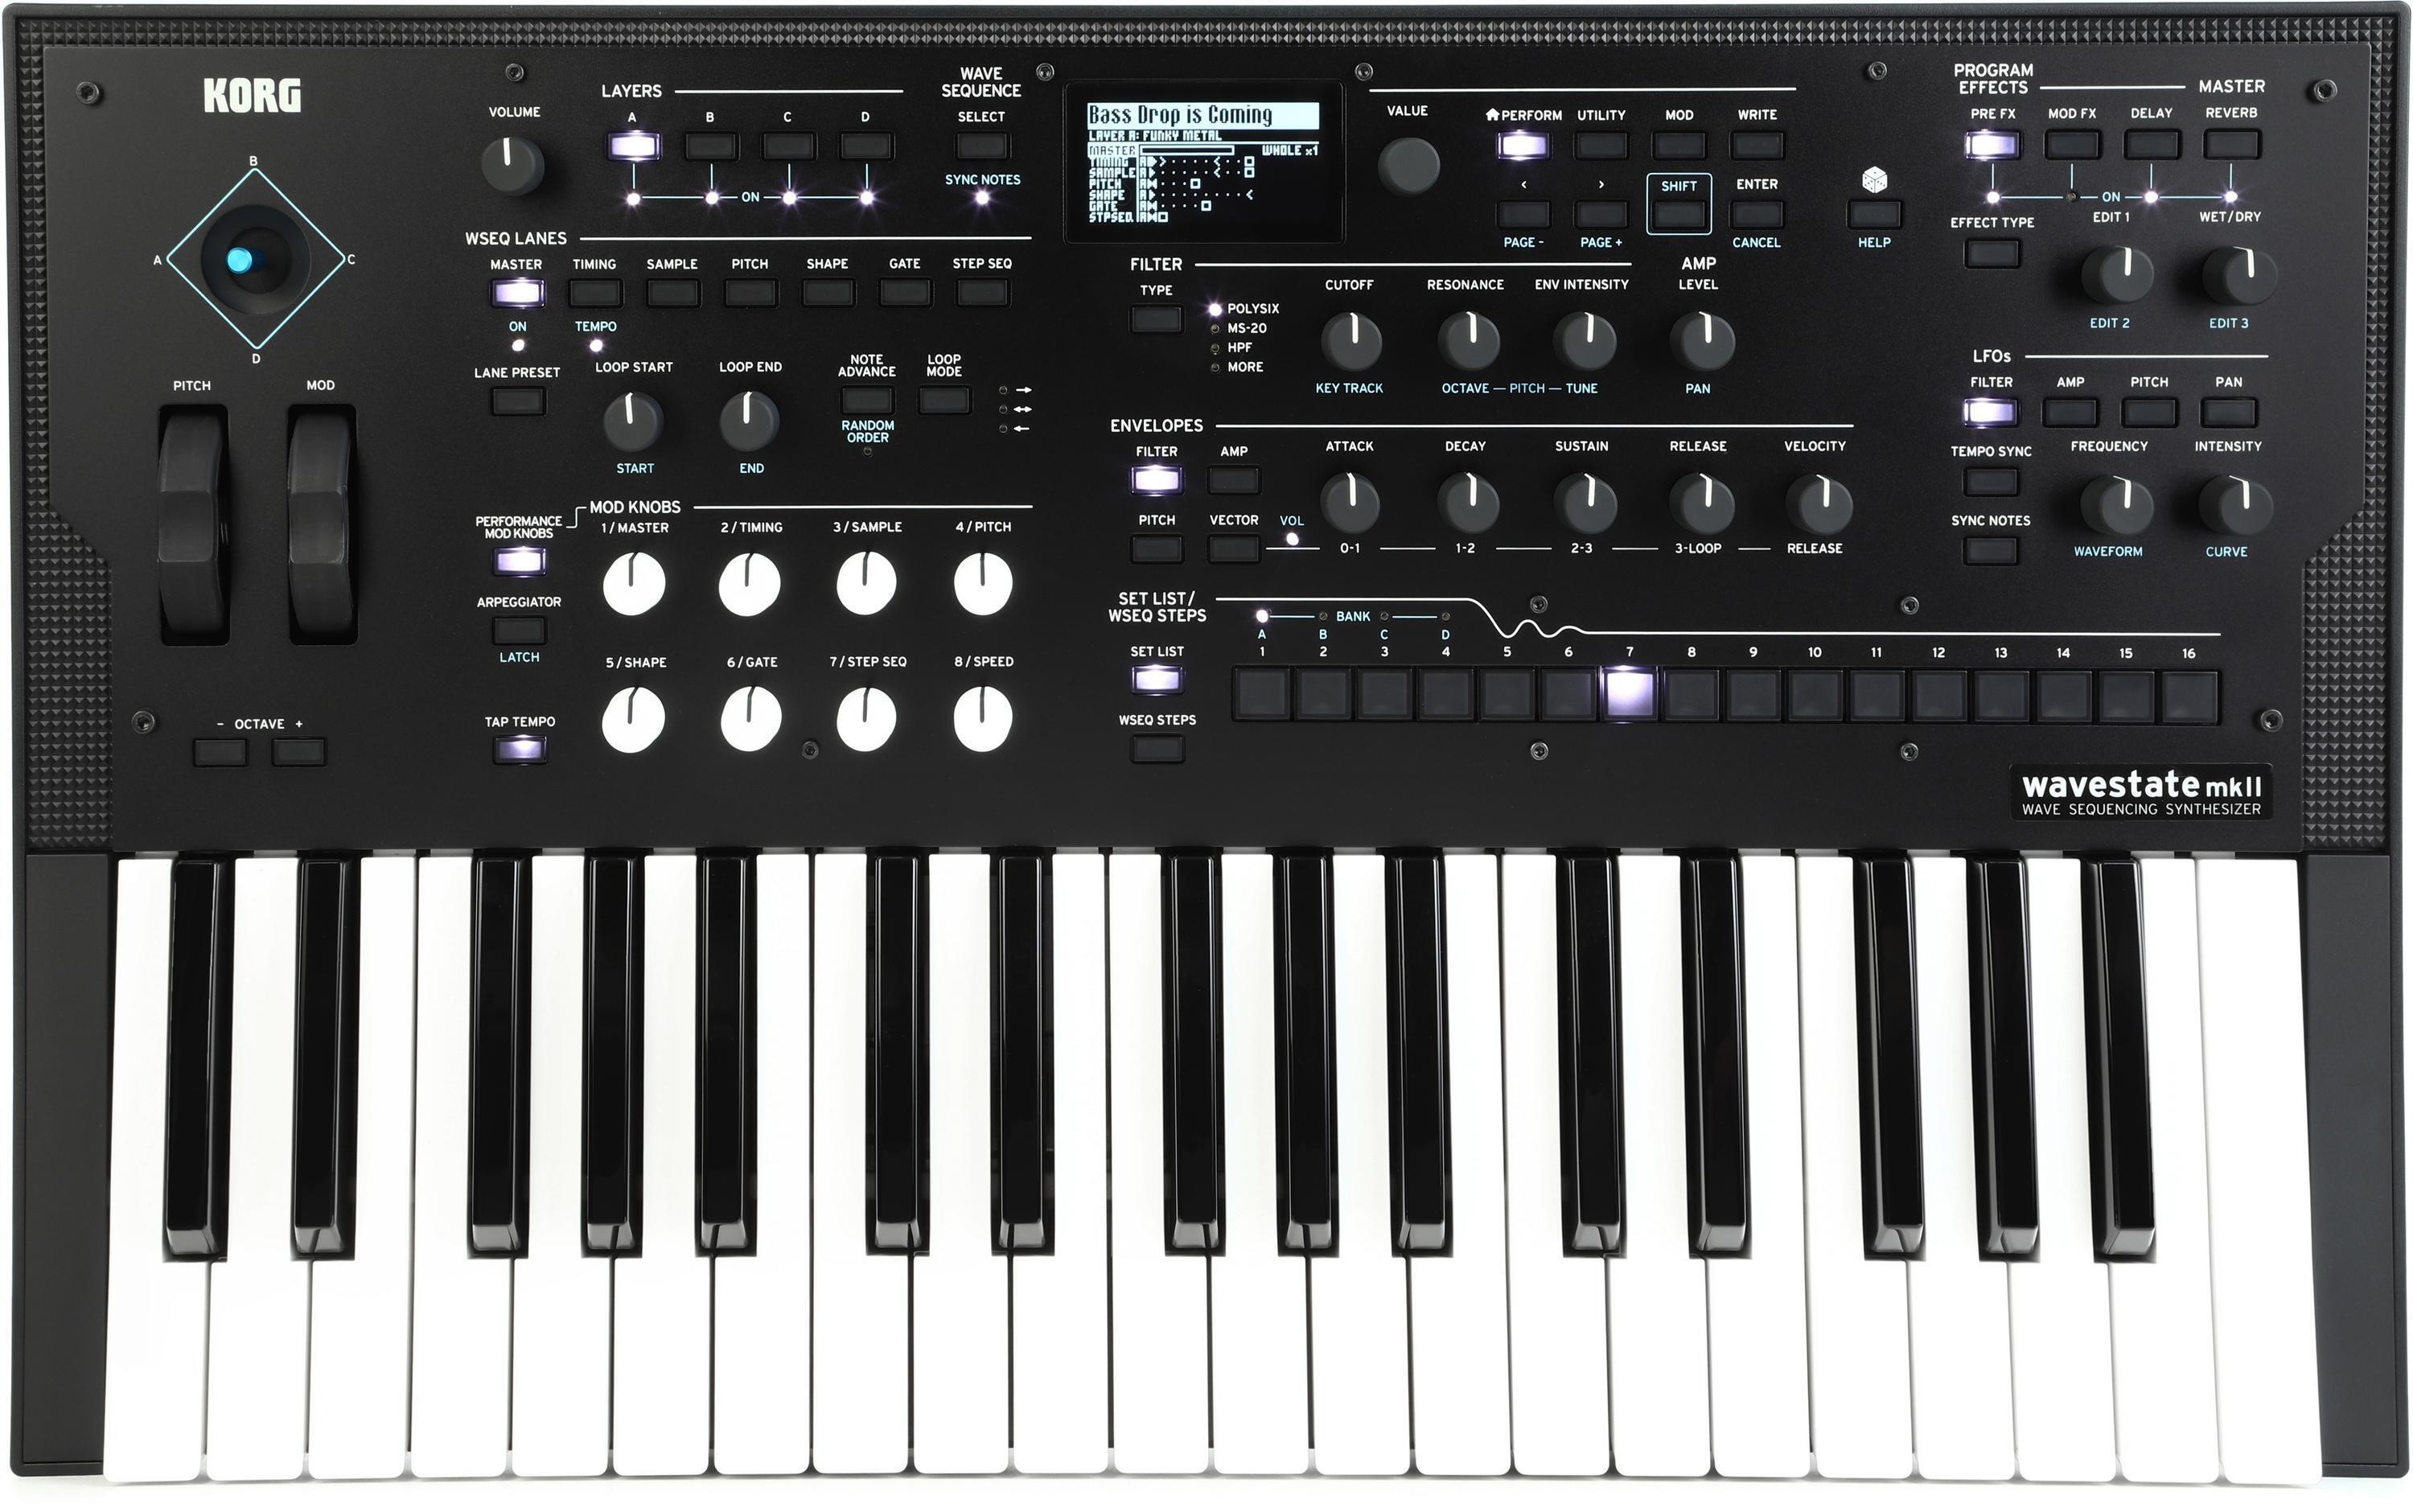 Korg wavestate mk II 37-key Wave Sequencing Synthesizer | Sweetwater